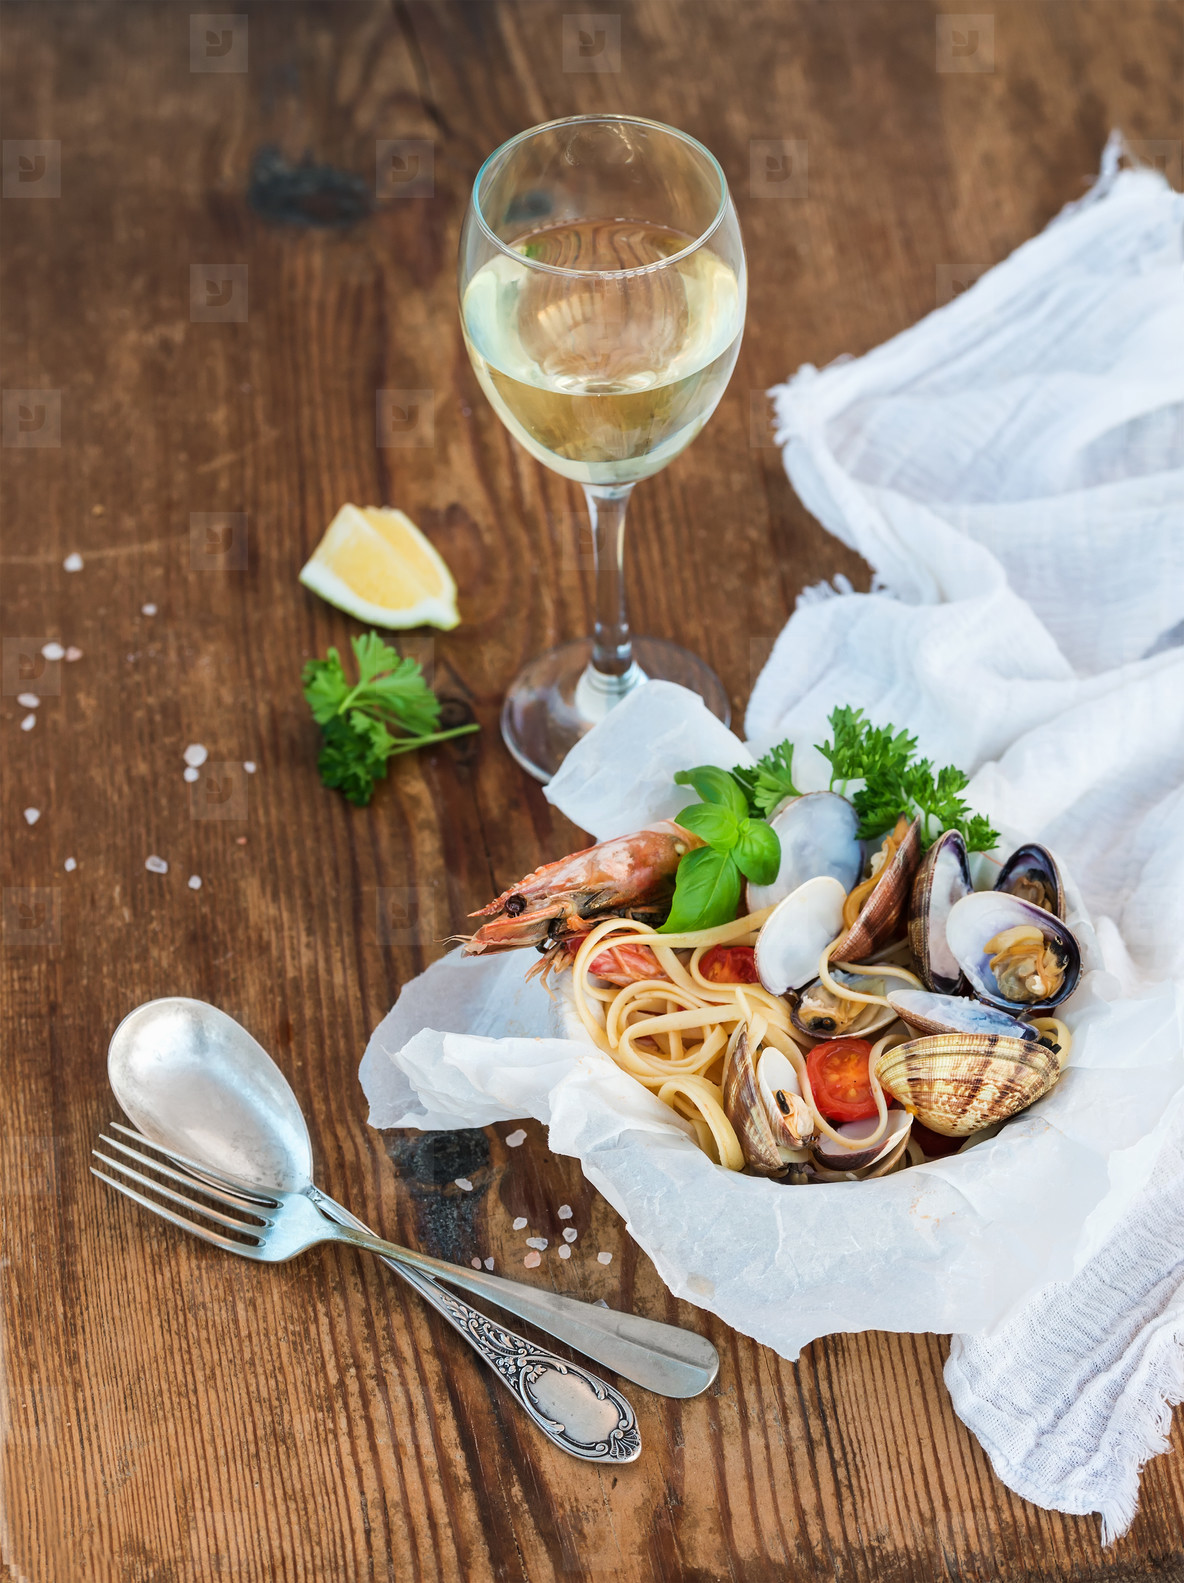 Seafood pasta  Spaghetti with clams and shrimps in bowl  glass of white wine over rustic wood background